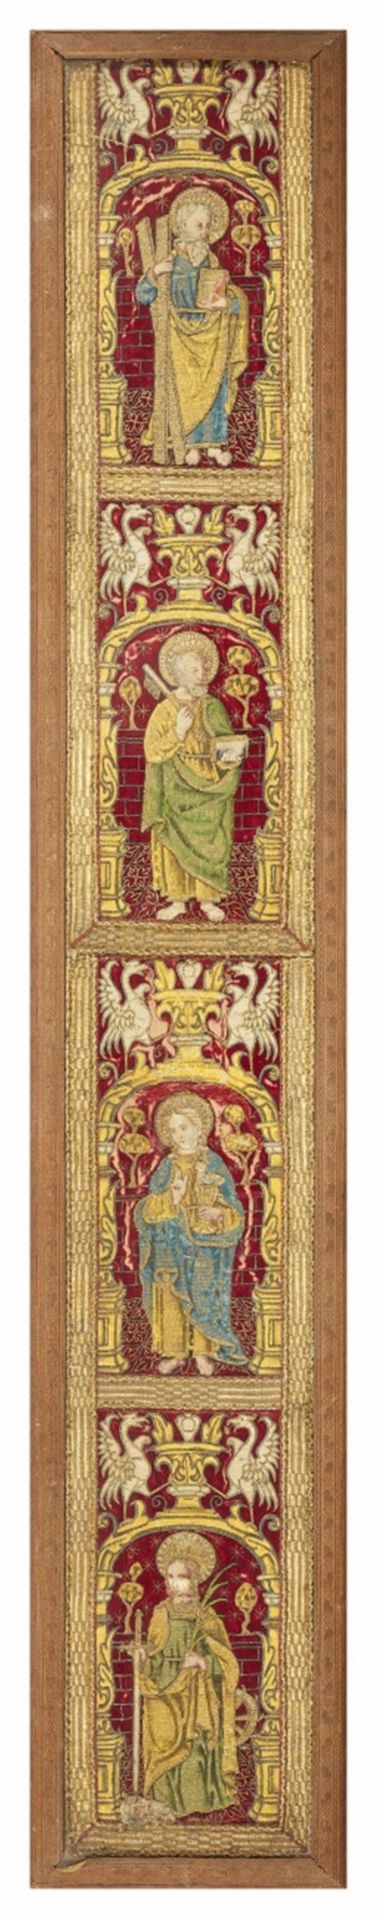 An embroidered pillar decoration with a depiction of four saints